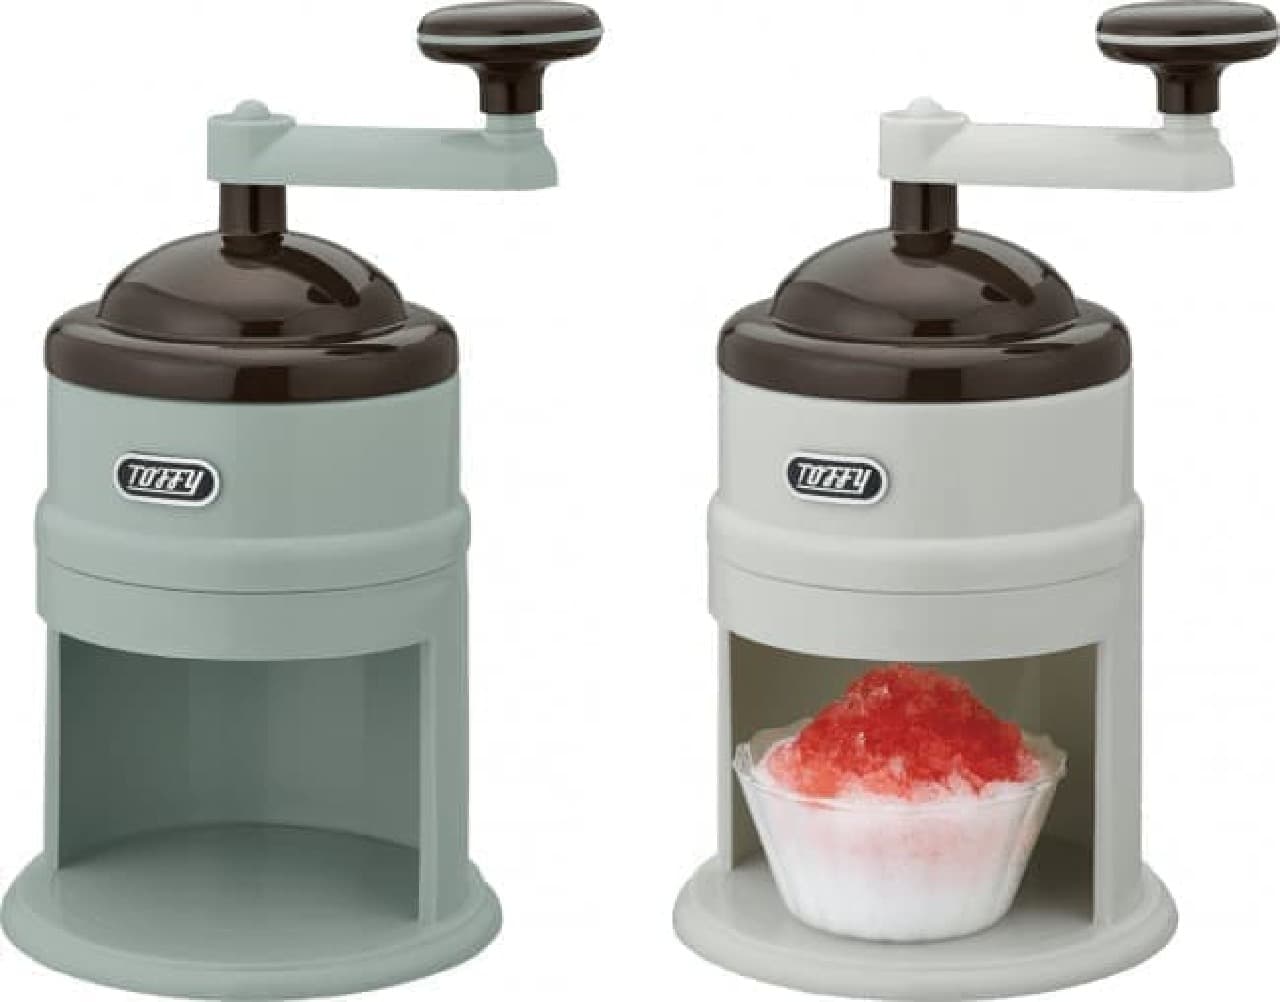 Toffy electric fluffy ice machine